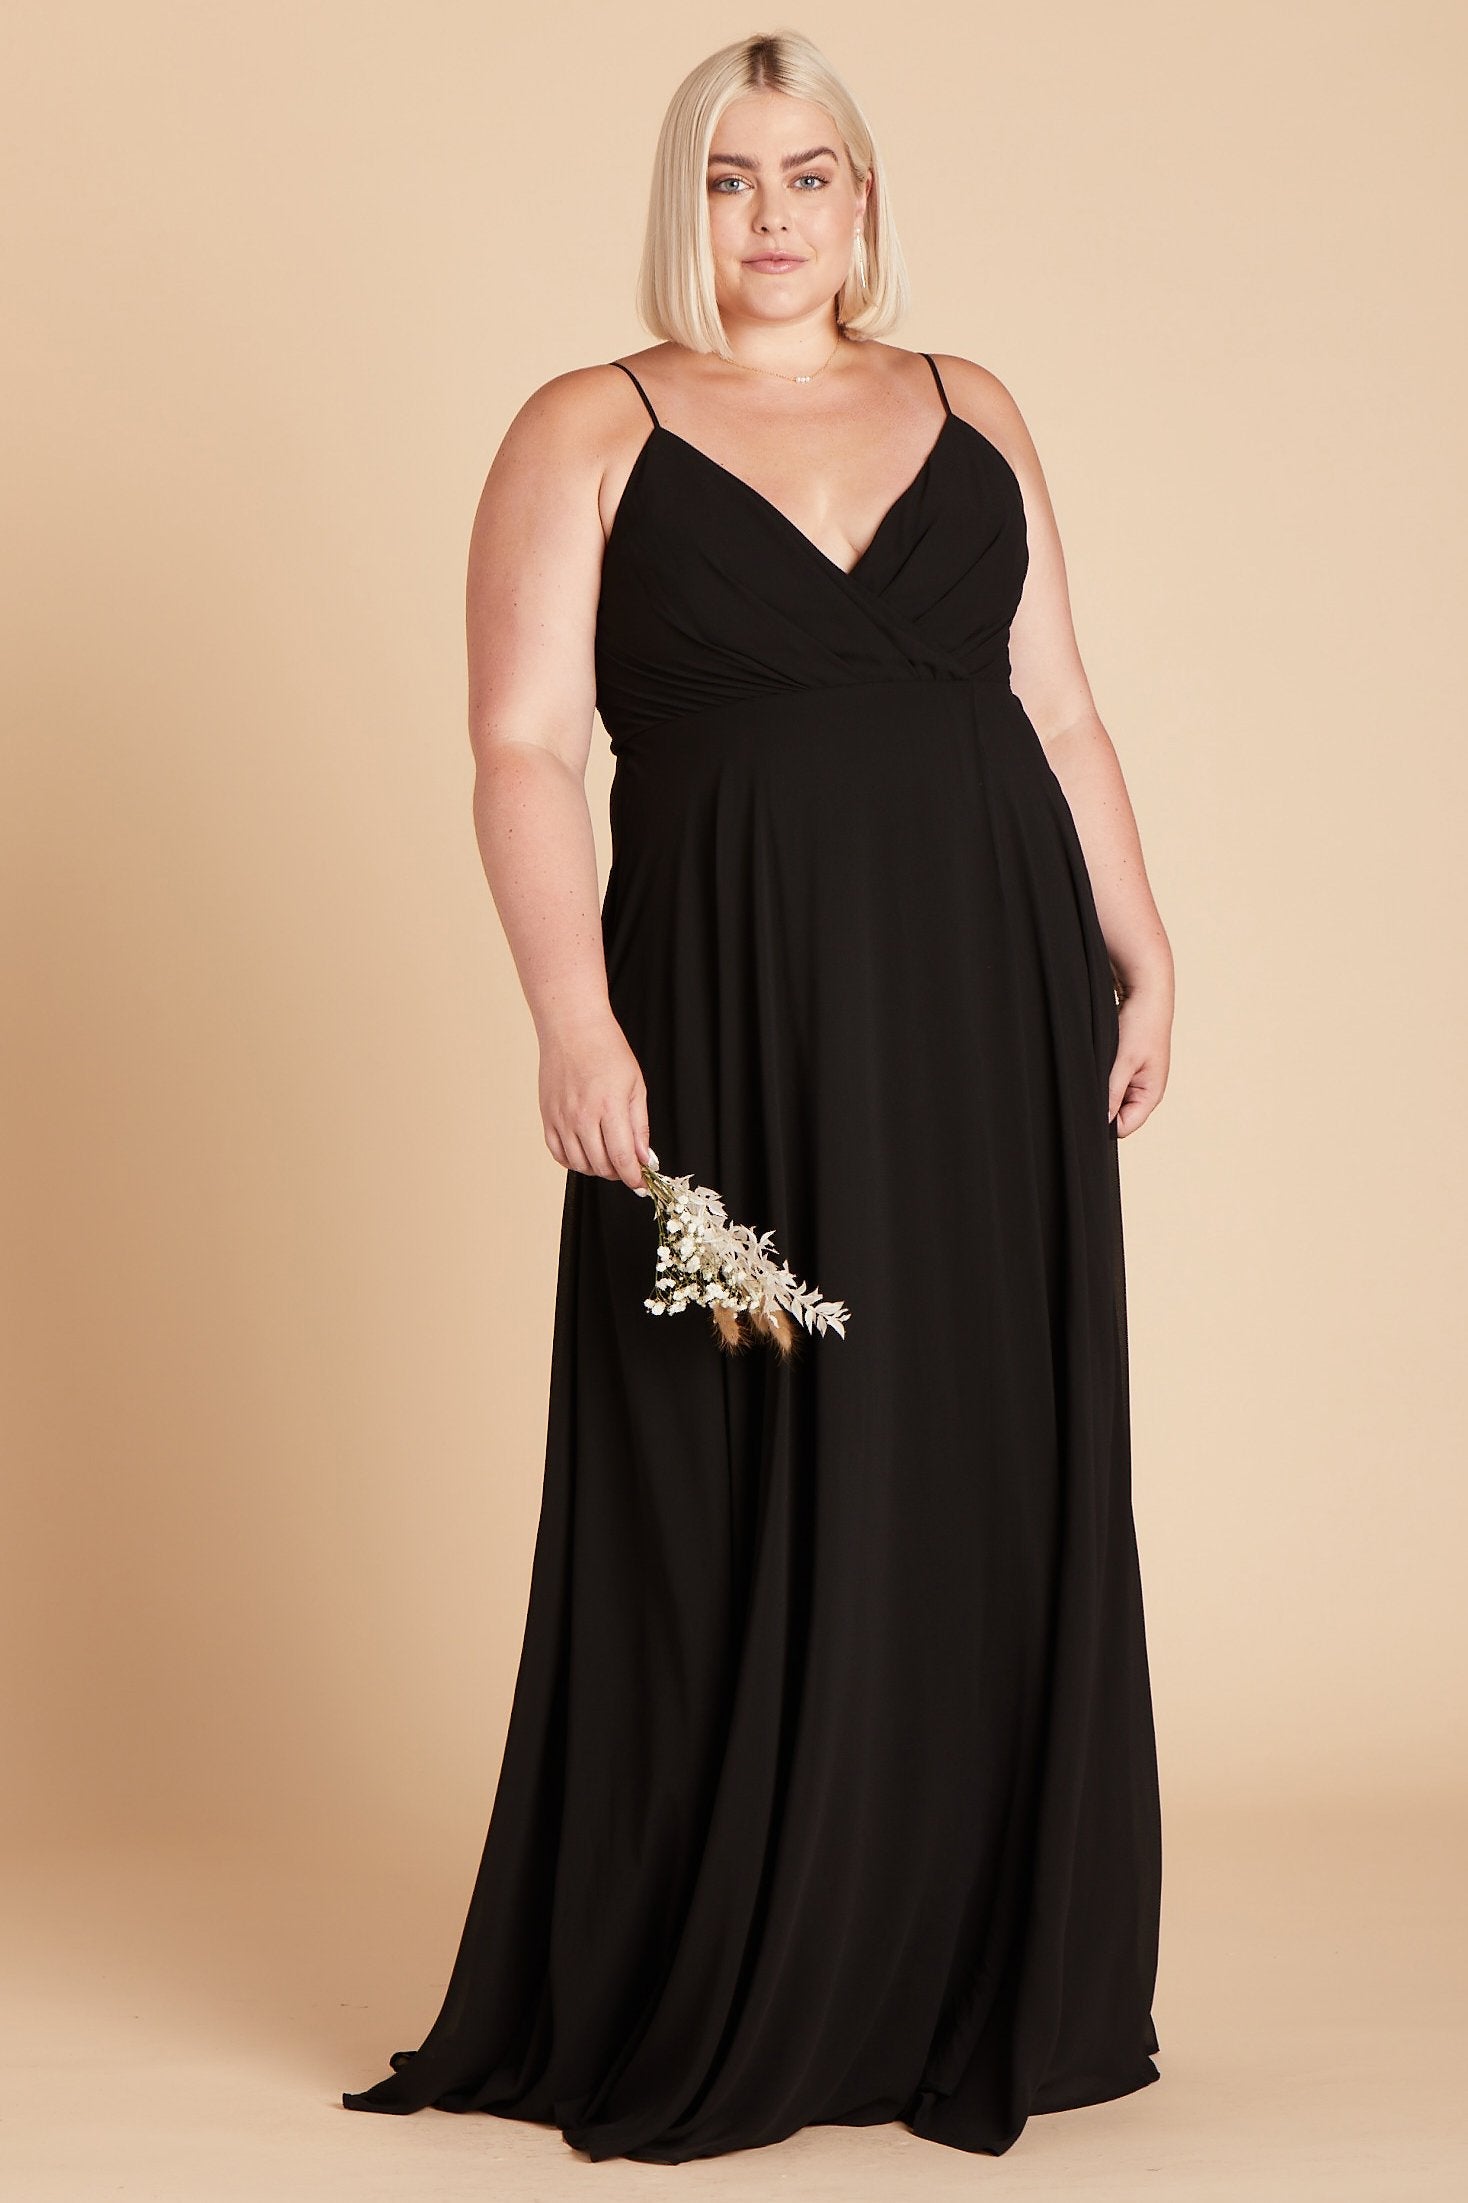 Kaia plus size bridesmaids dress in black chiffon by Birdy Grey, front view